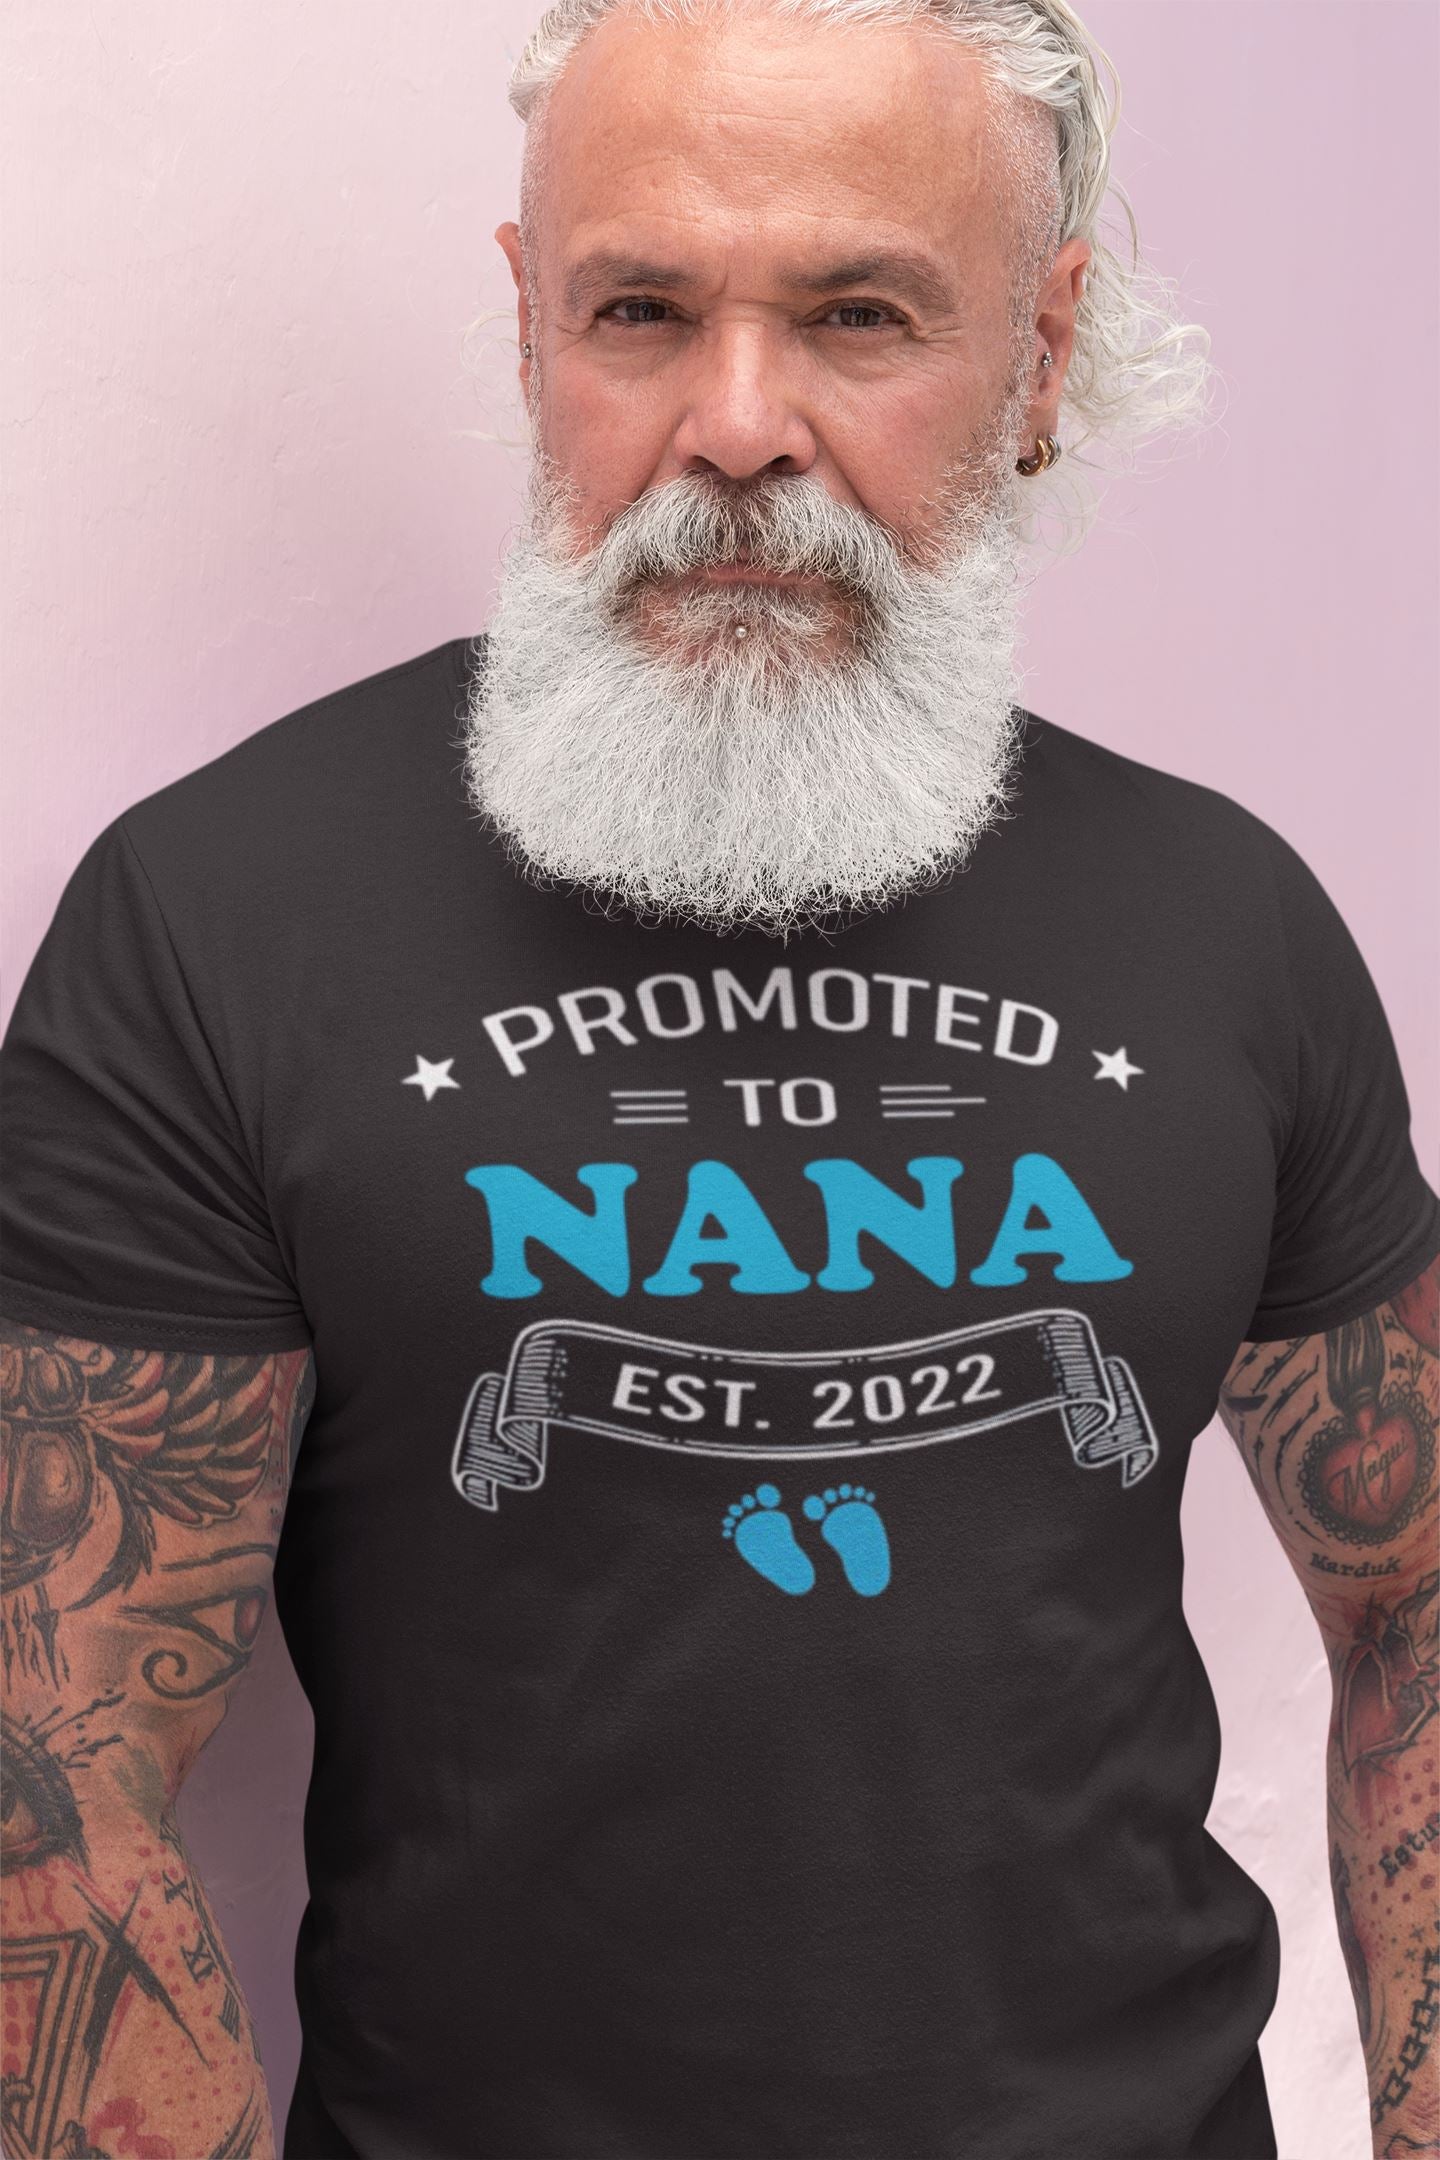 Promoted to Nana Est. 2022 Exclusive T Shirt for Men freeshipping - Catch My Drift India